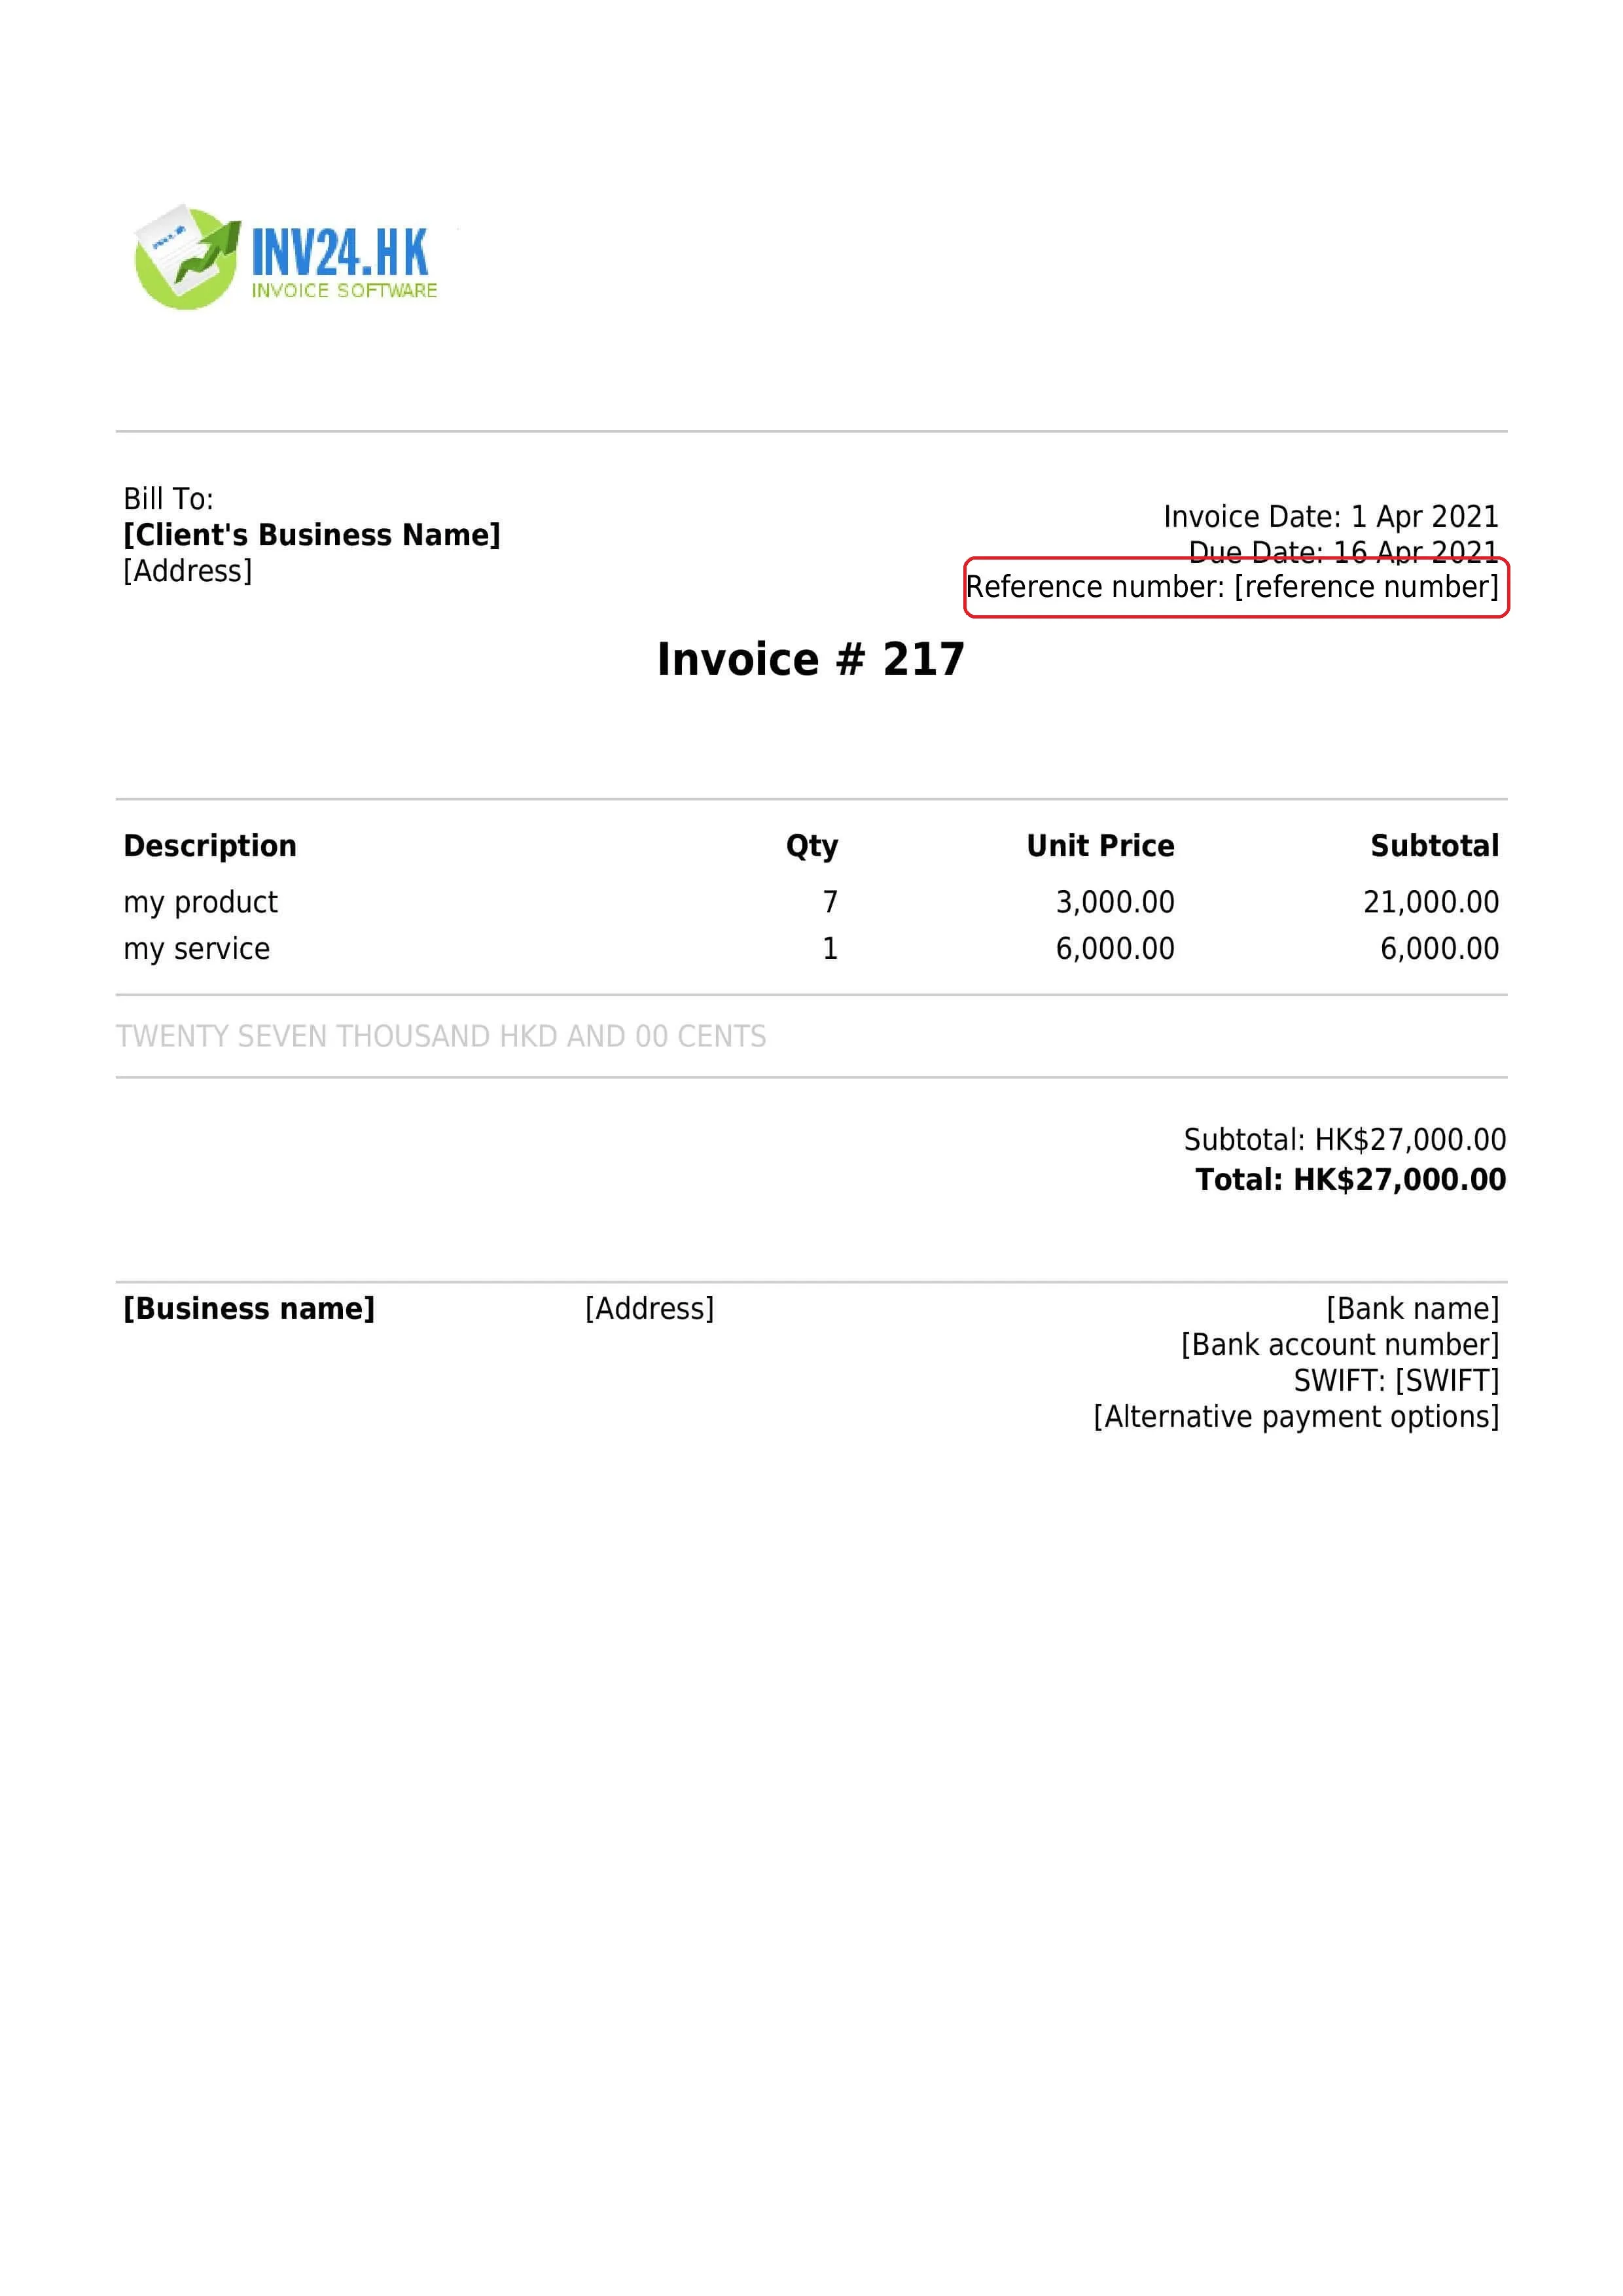 payment reference number on the invoice